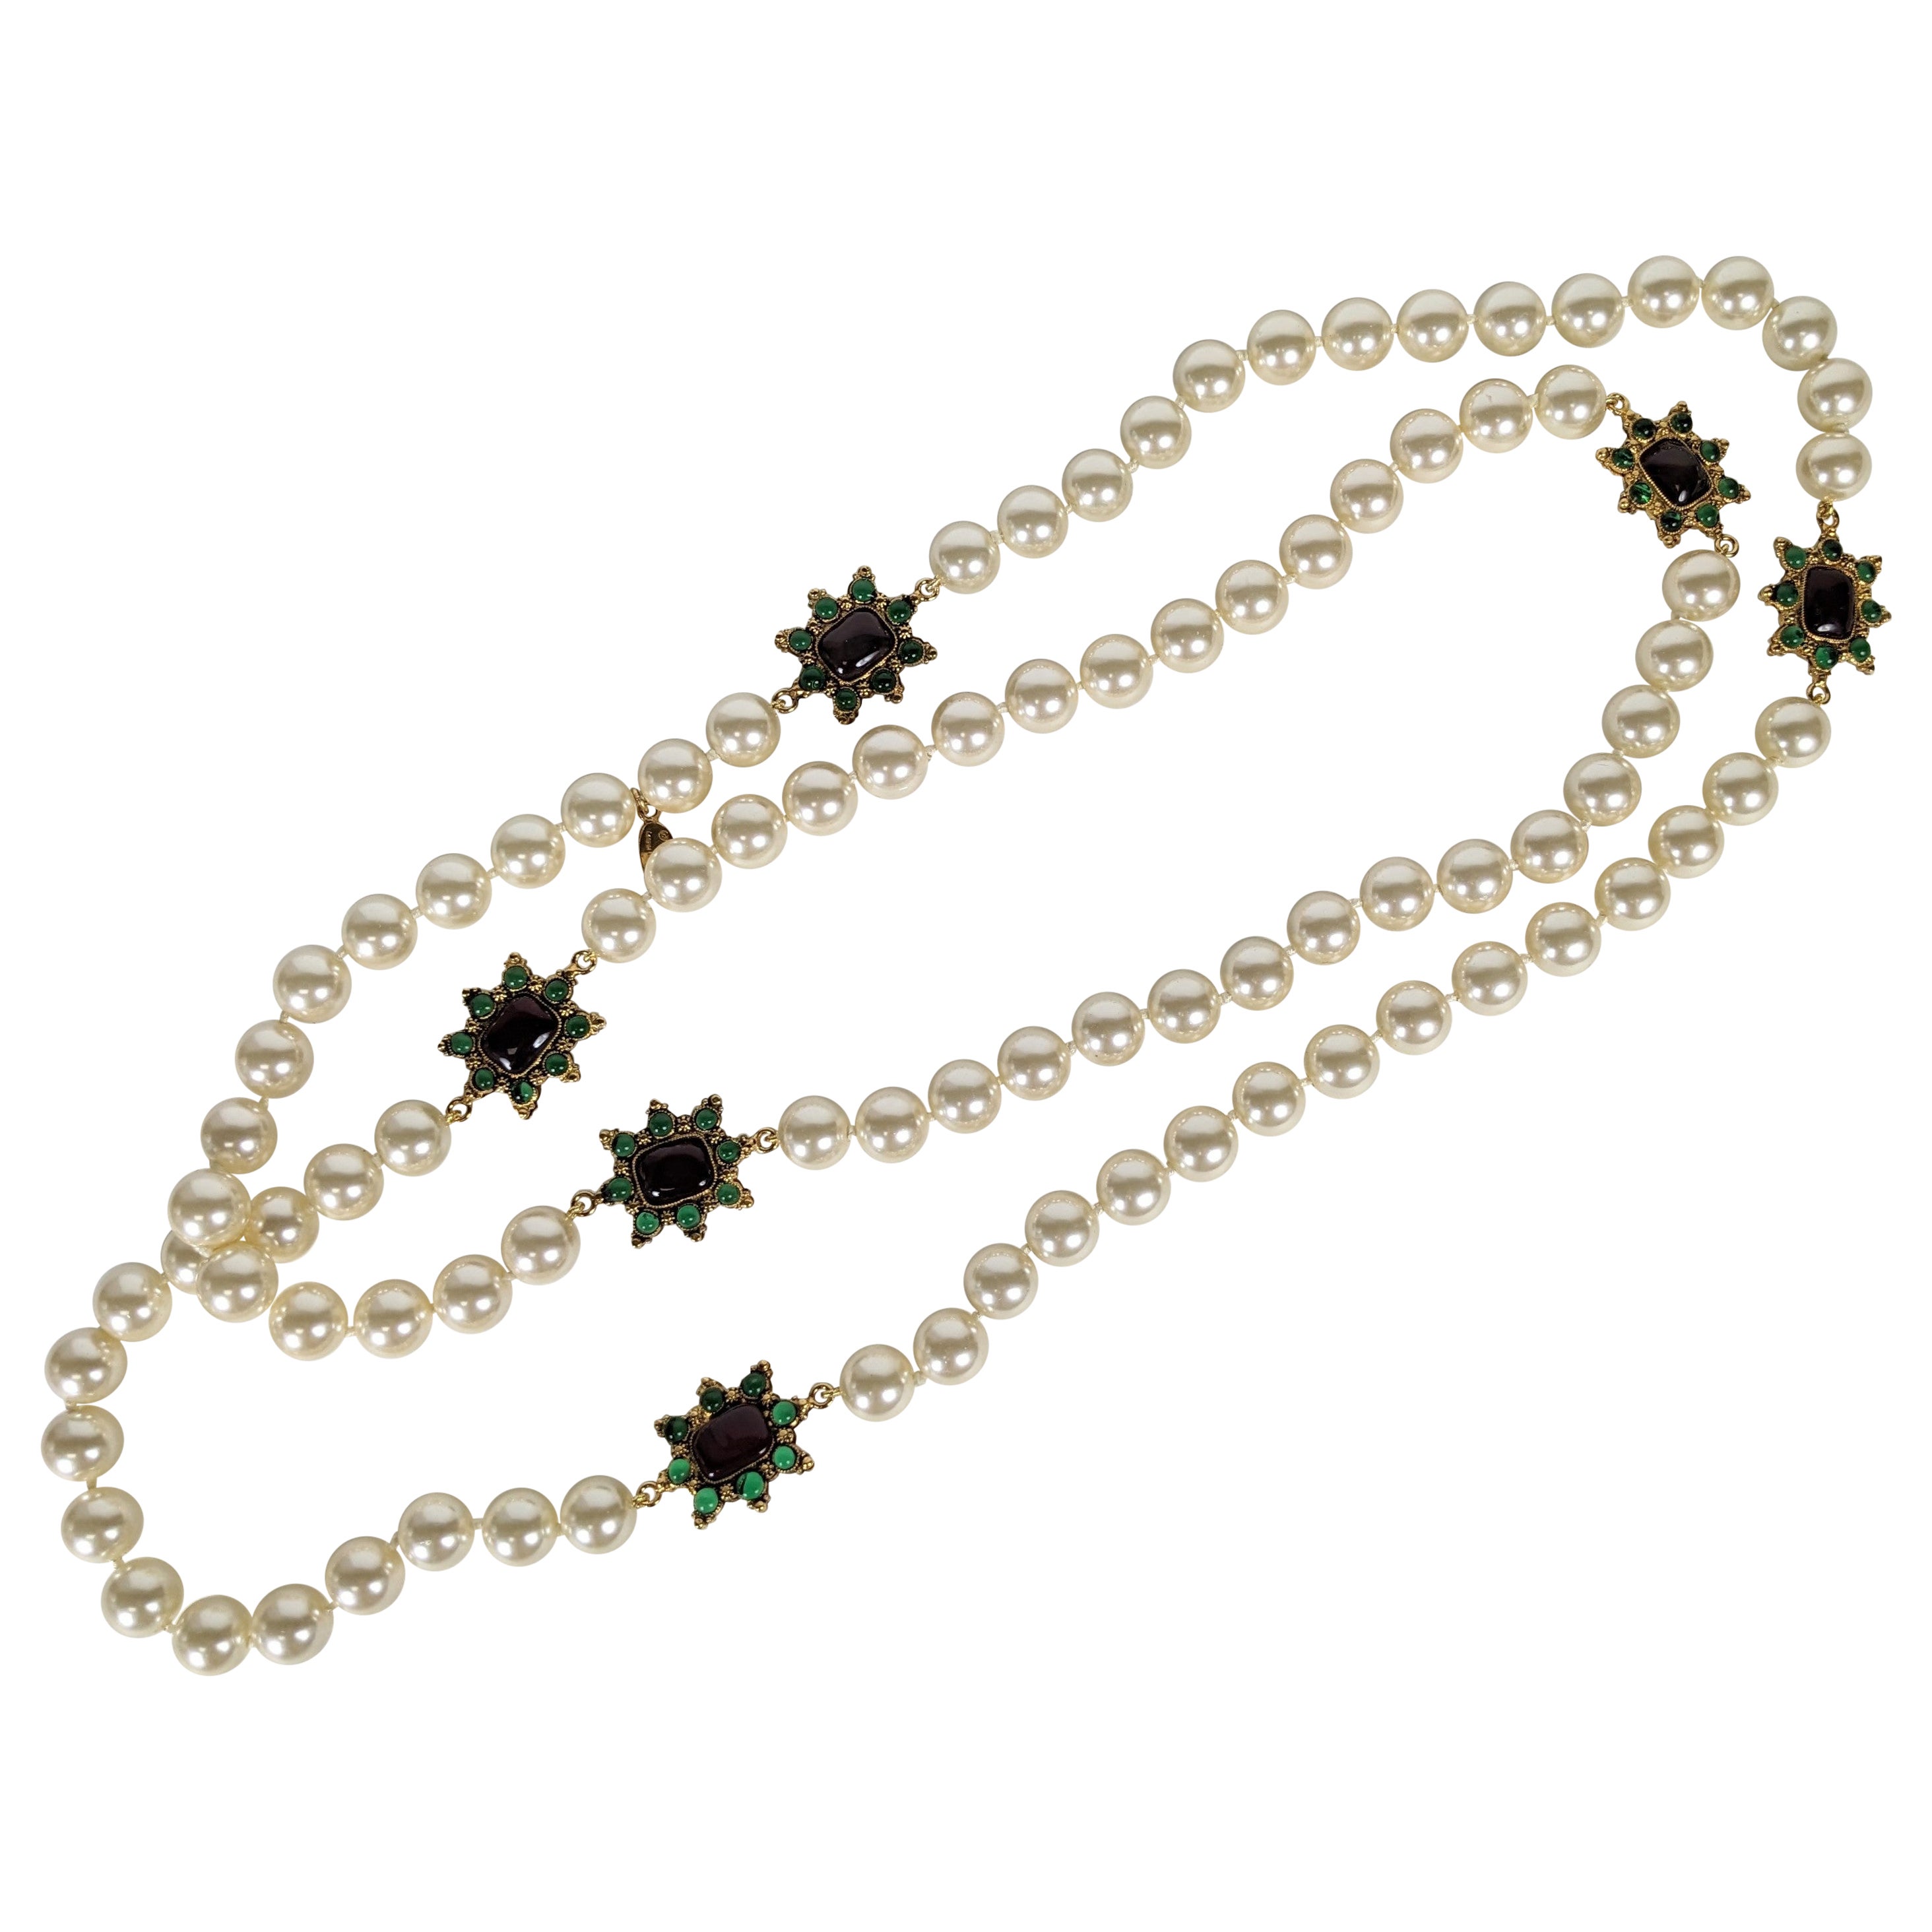 Maison Gripoix for Chanel Beaded Necklaces